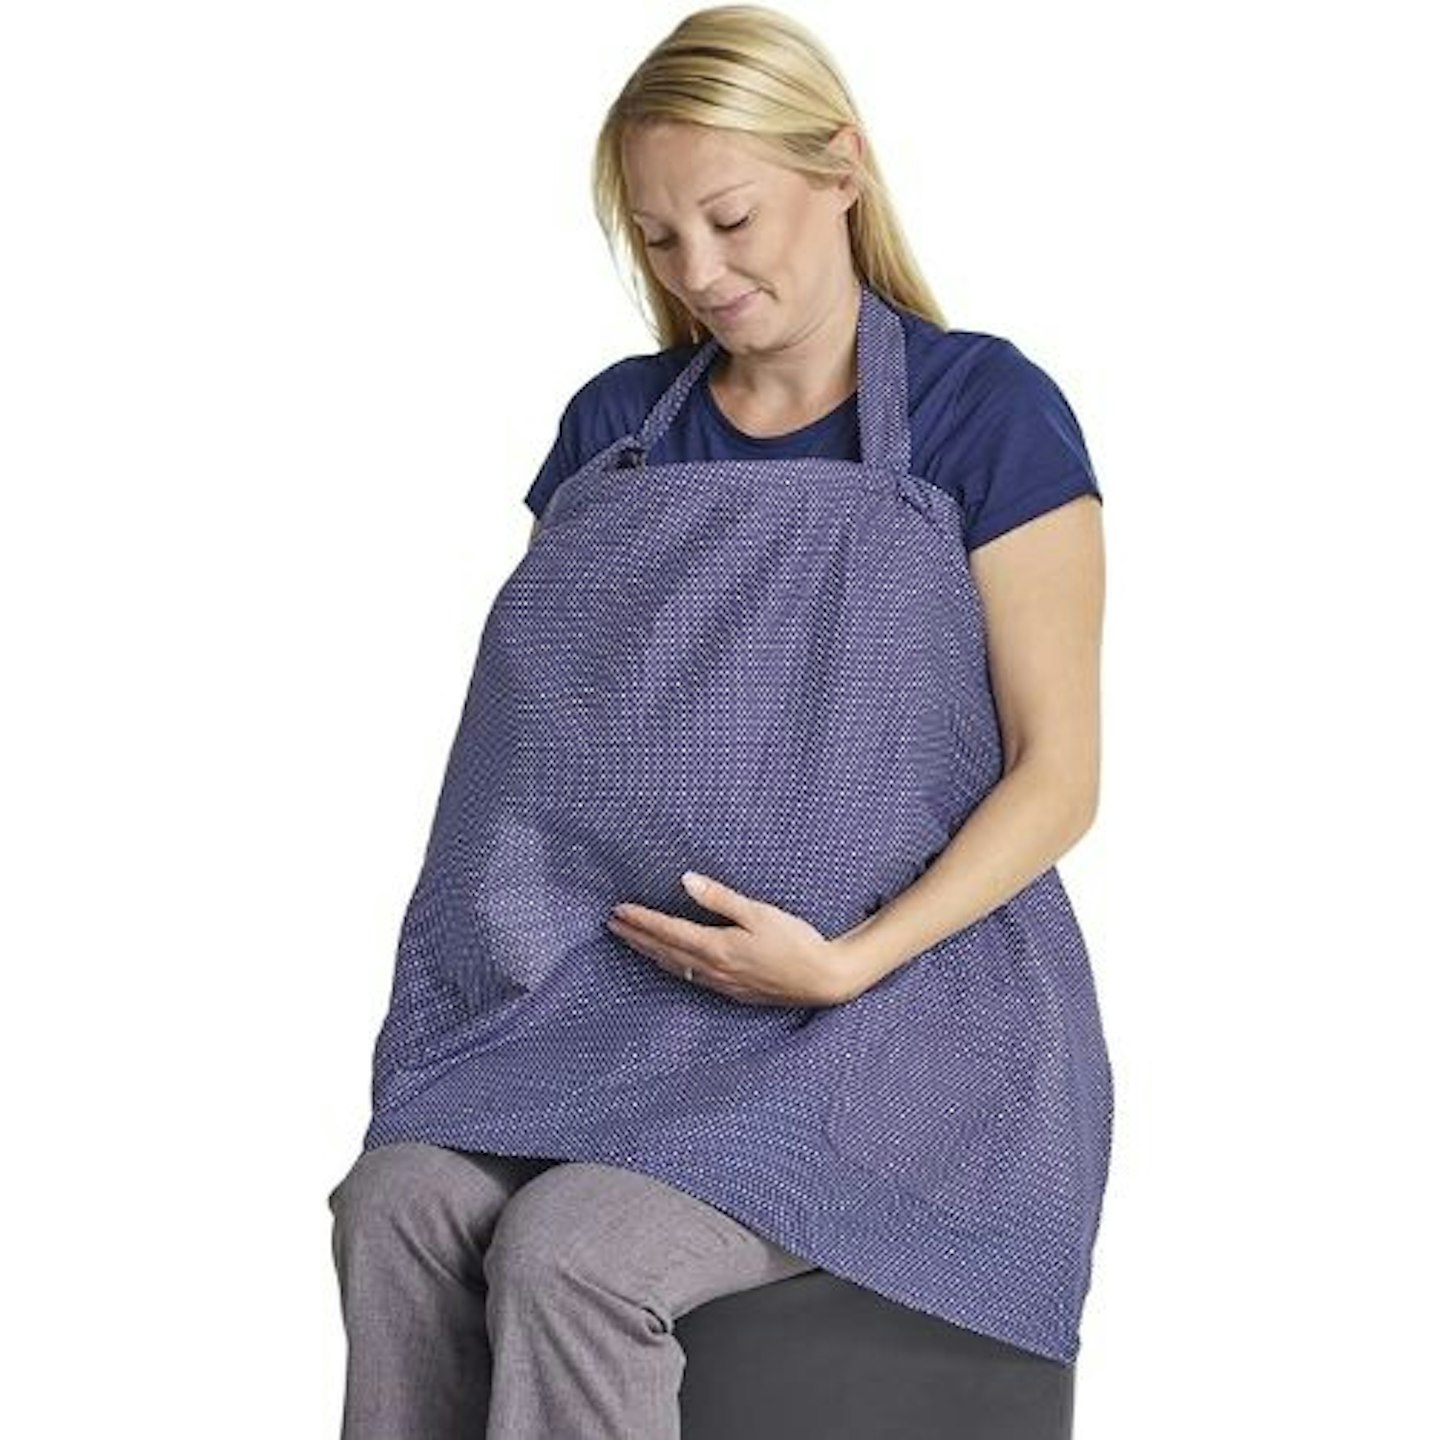 Breastfeeding Cover up, Nursing Cover and Scarf Apron